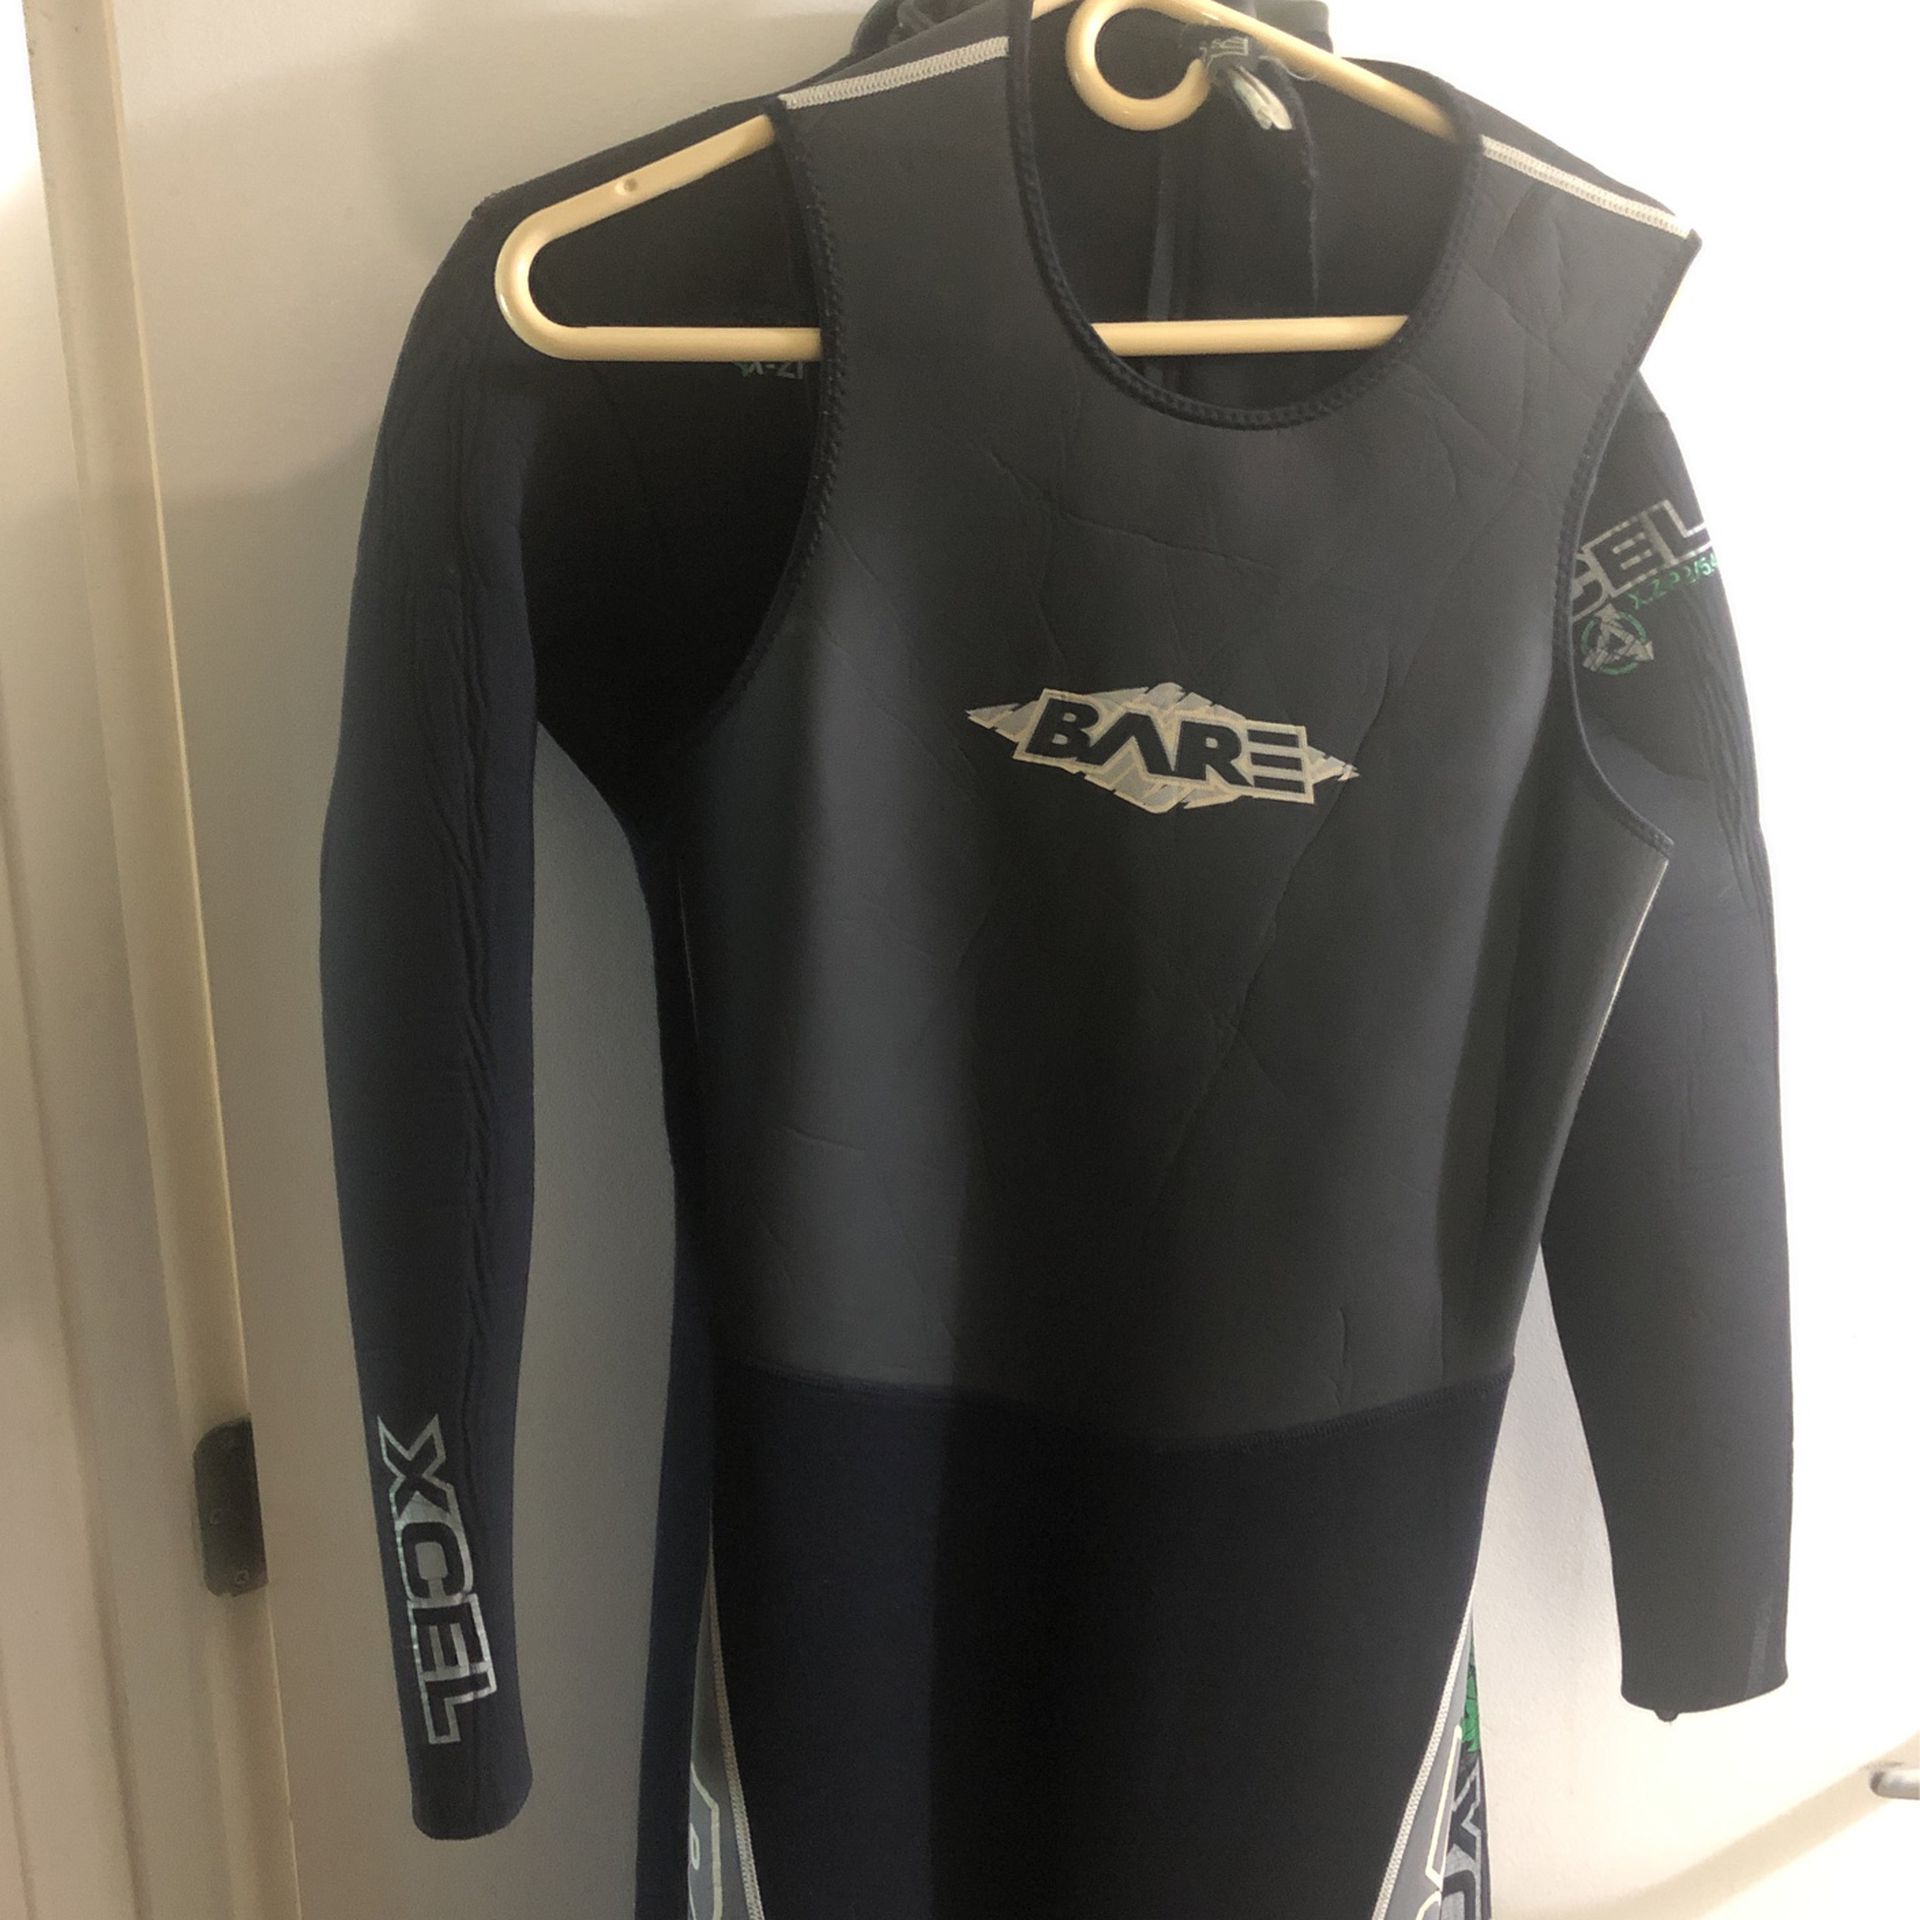 Two Wet Suits Men’s Or Unisex Size One Small One Medium Xcel And Bare